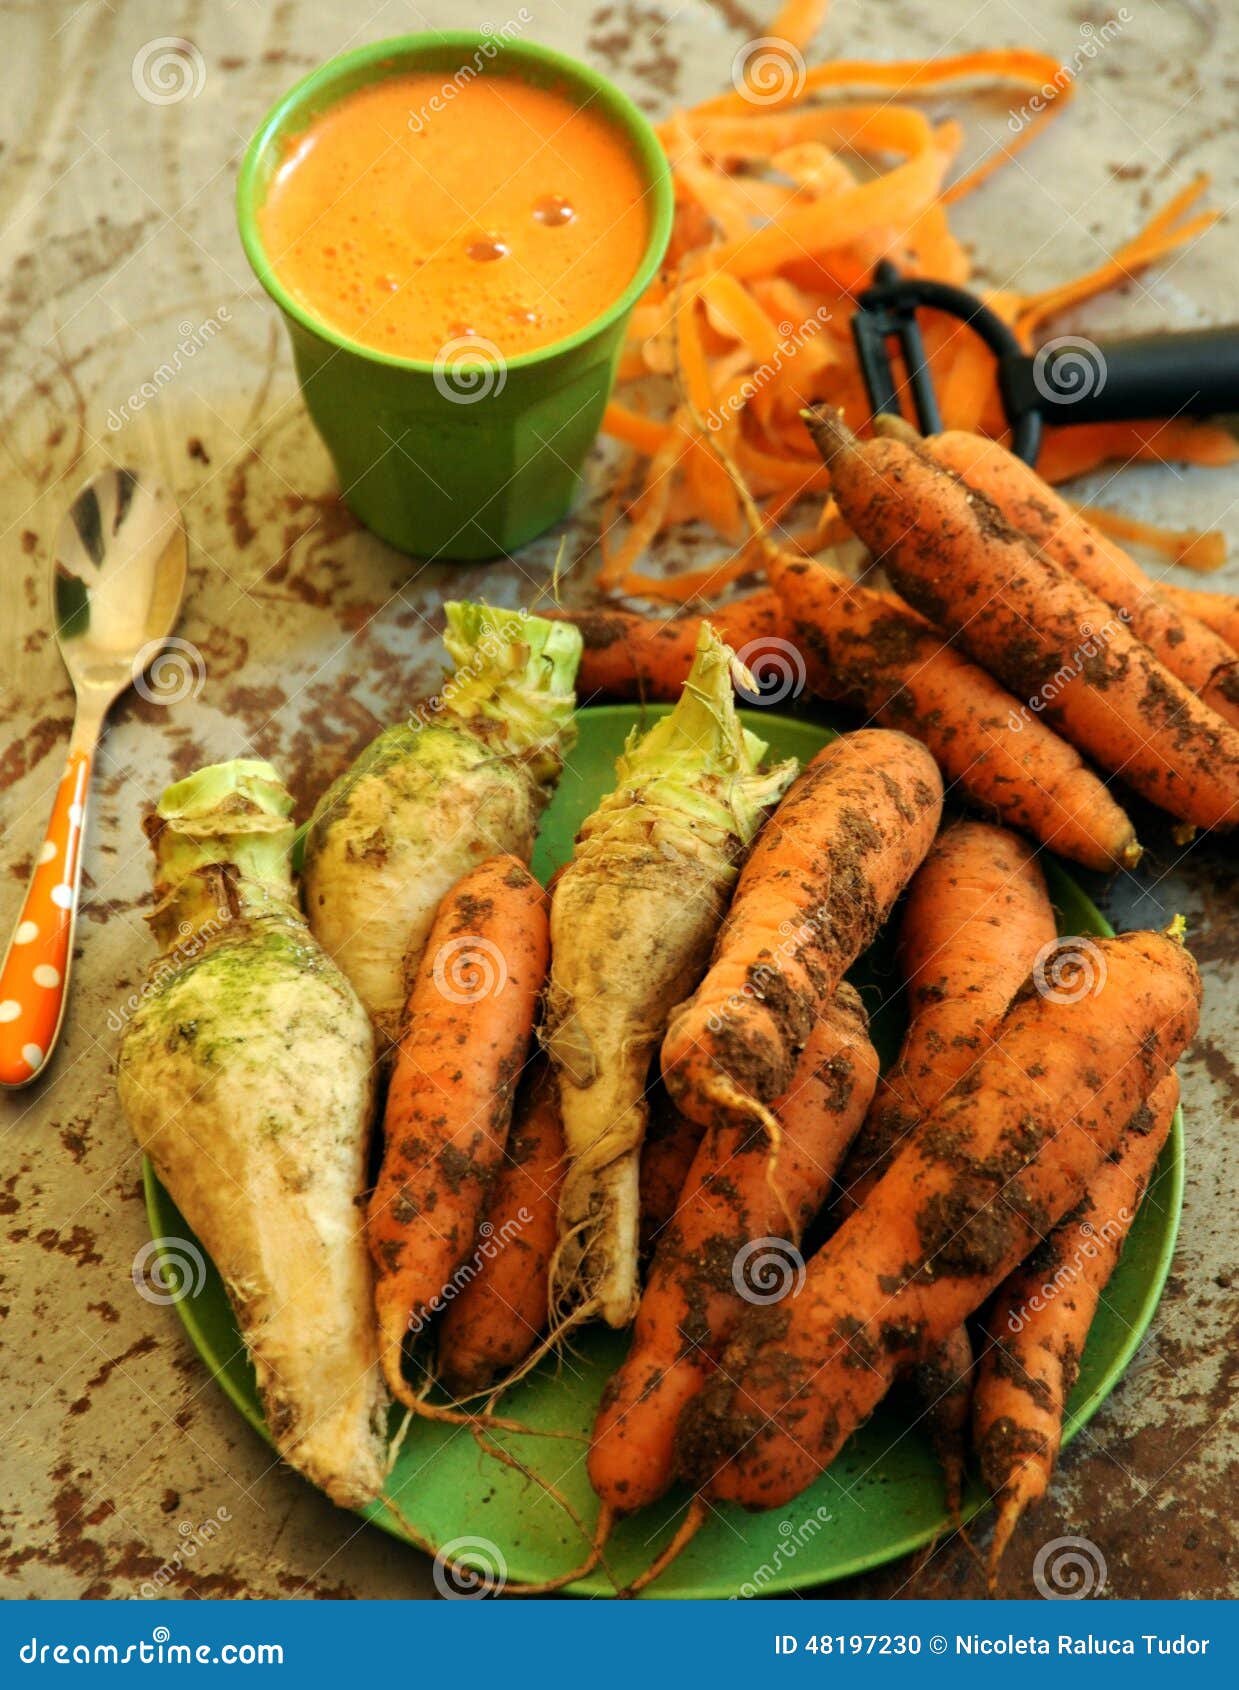 organic carrots and carrot juice for a healthy breakfast